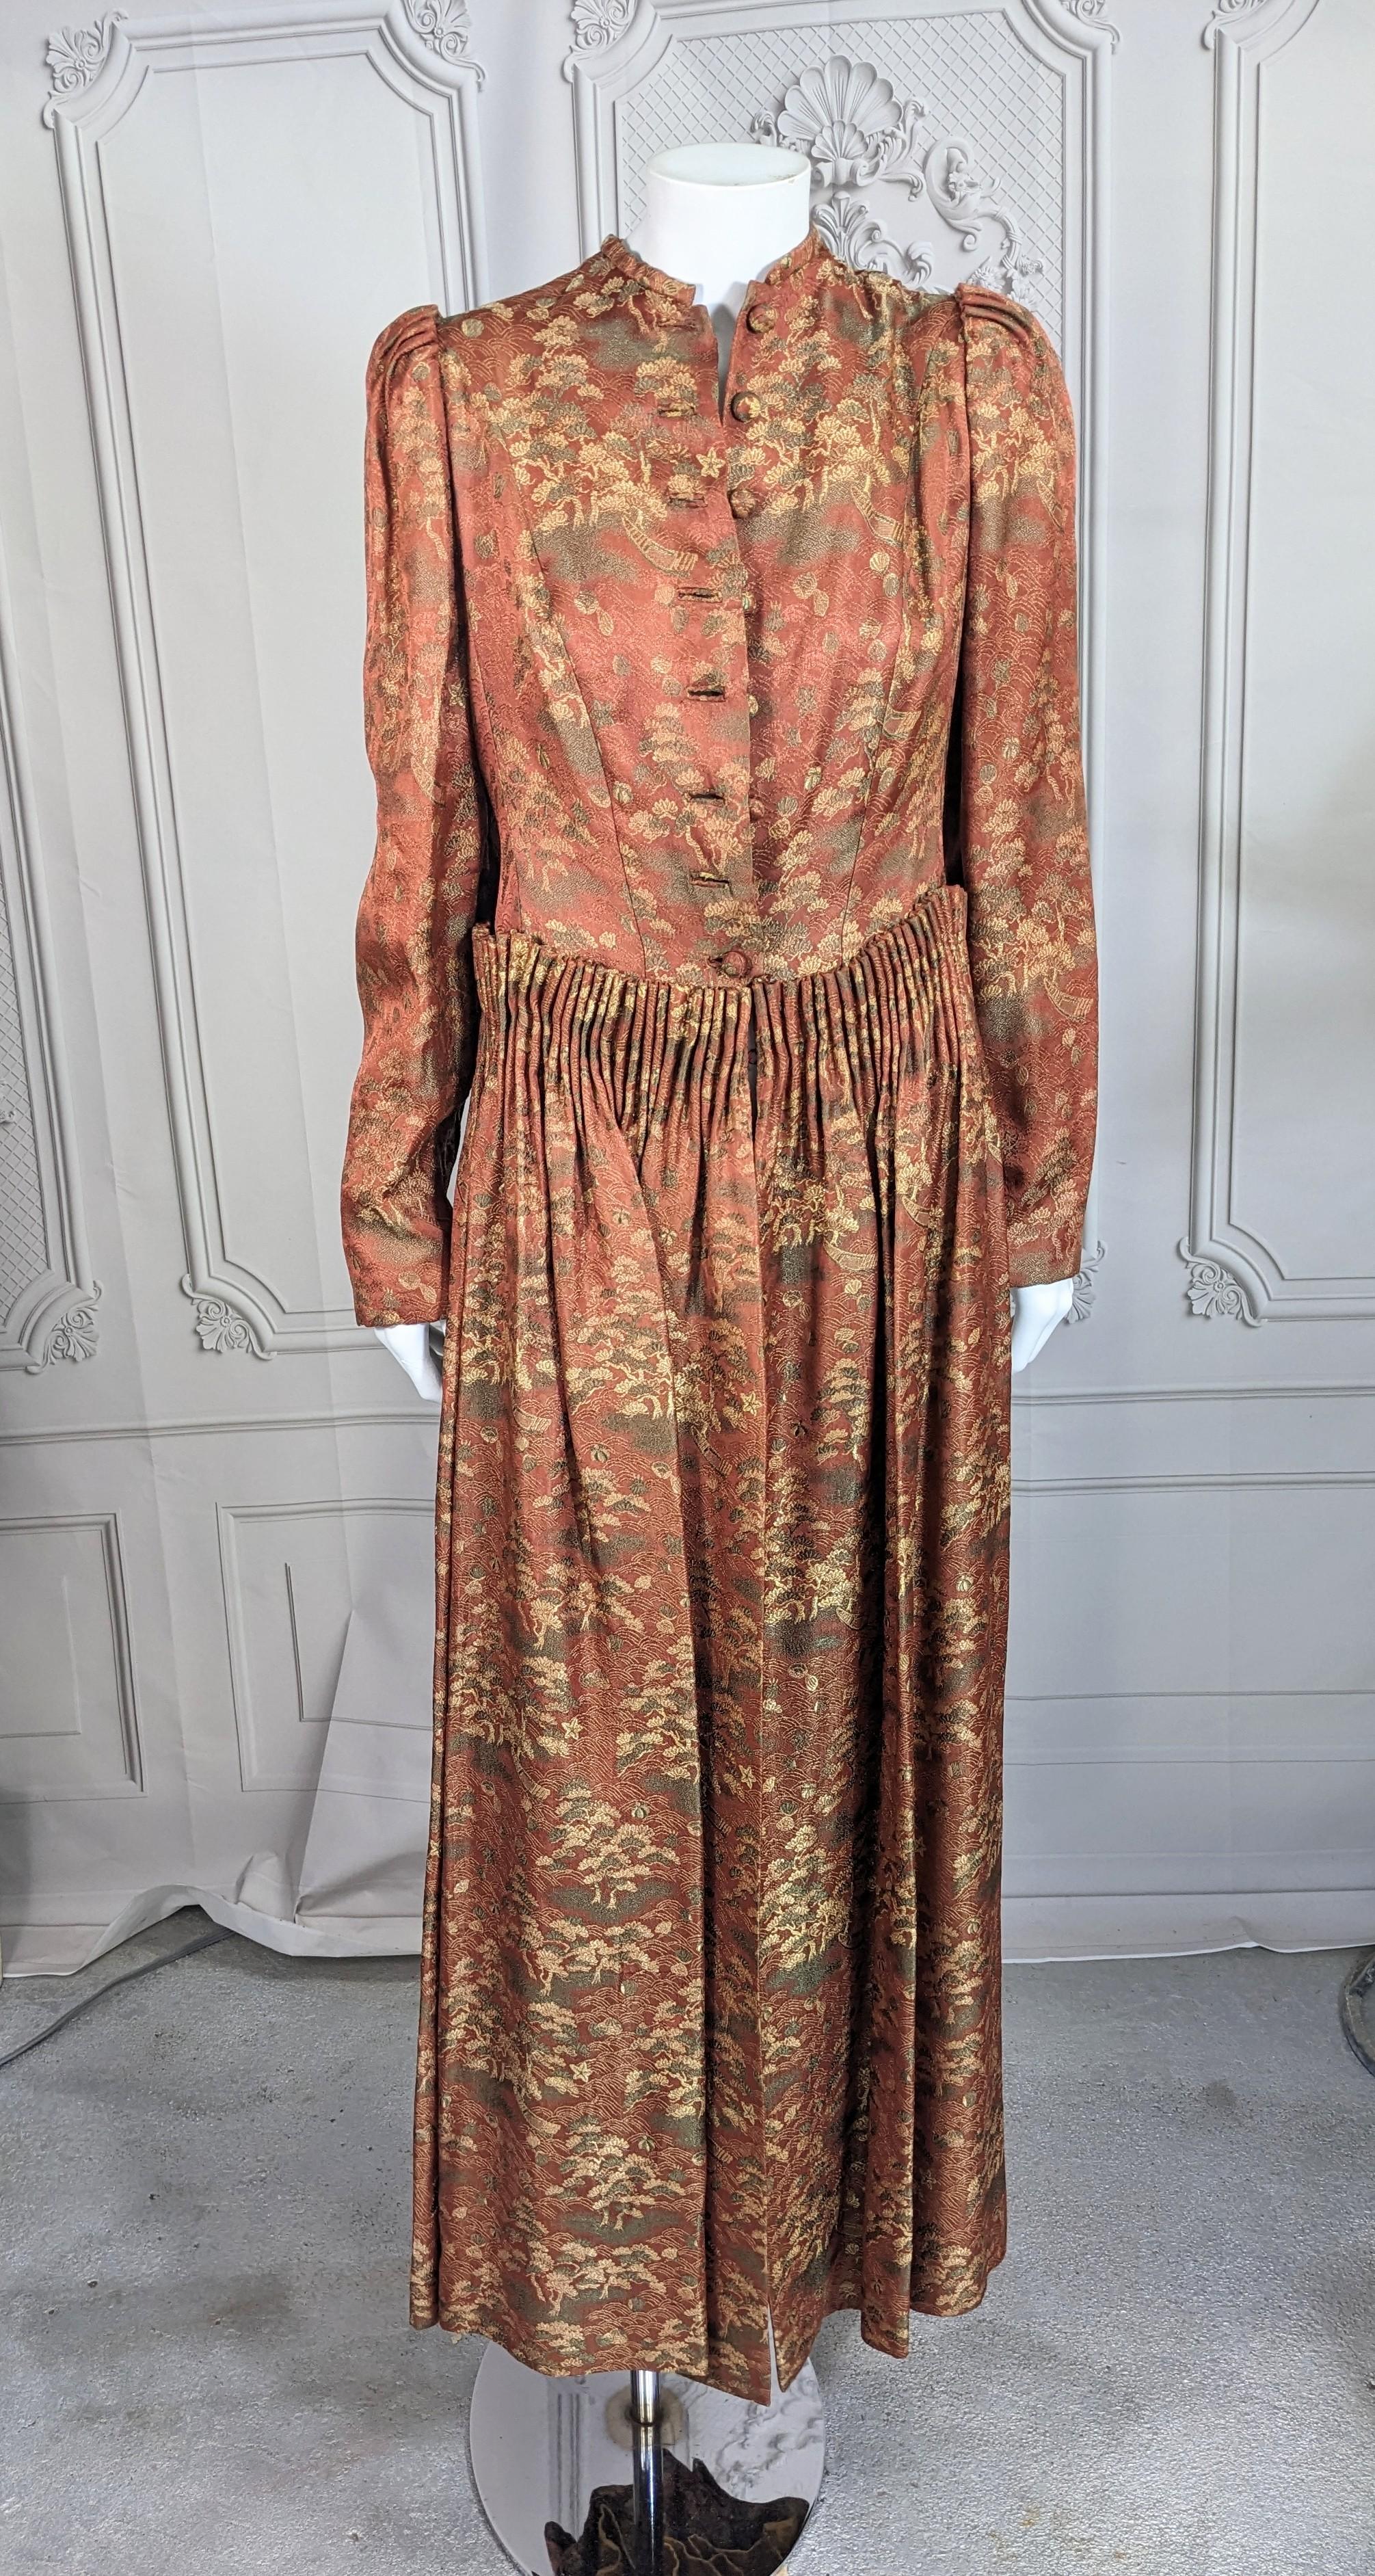 Art Deco Chinoiserie Evening Coat from the 1930's with cartridge pleating details at waist and shoulders. Designed as an indoor hostess coat for chilly weather, it can be easily worn for evenings out. Lined in yellow satin with light batting and